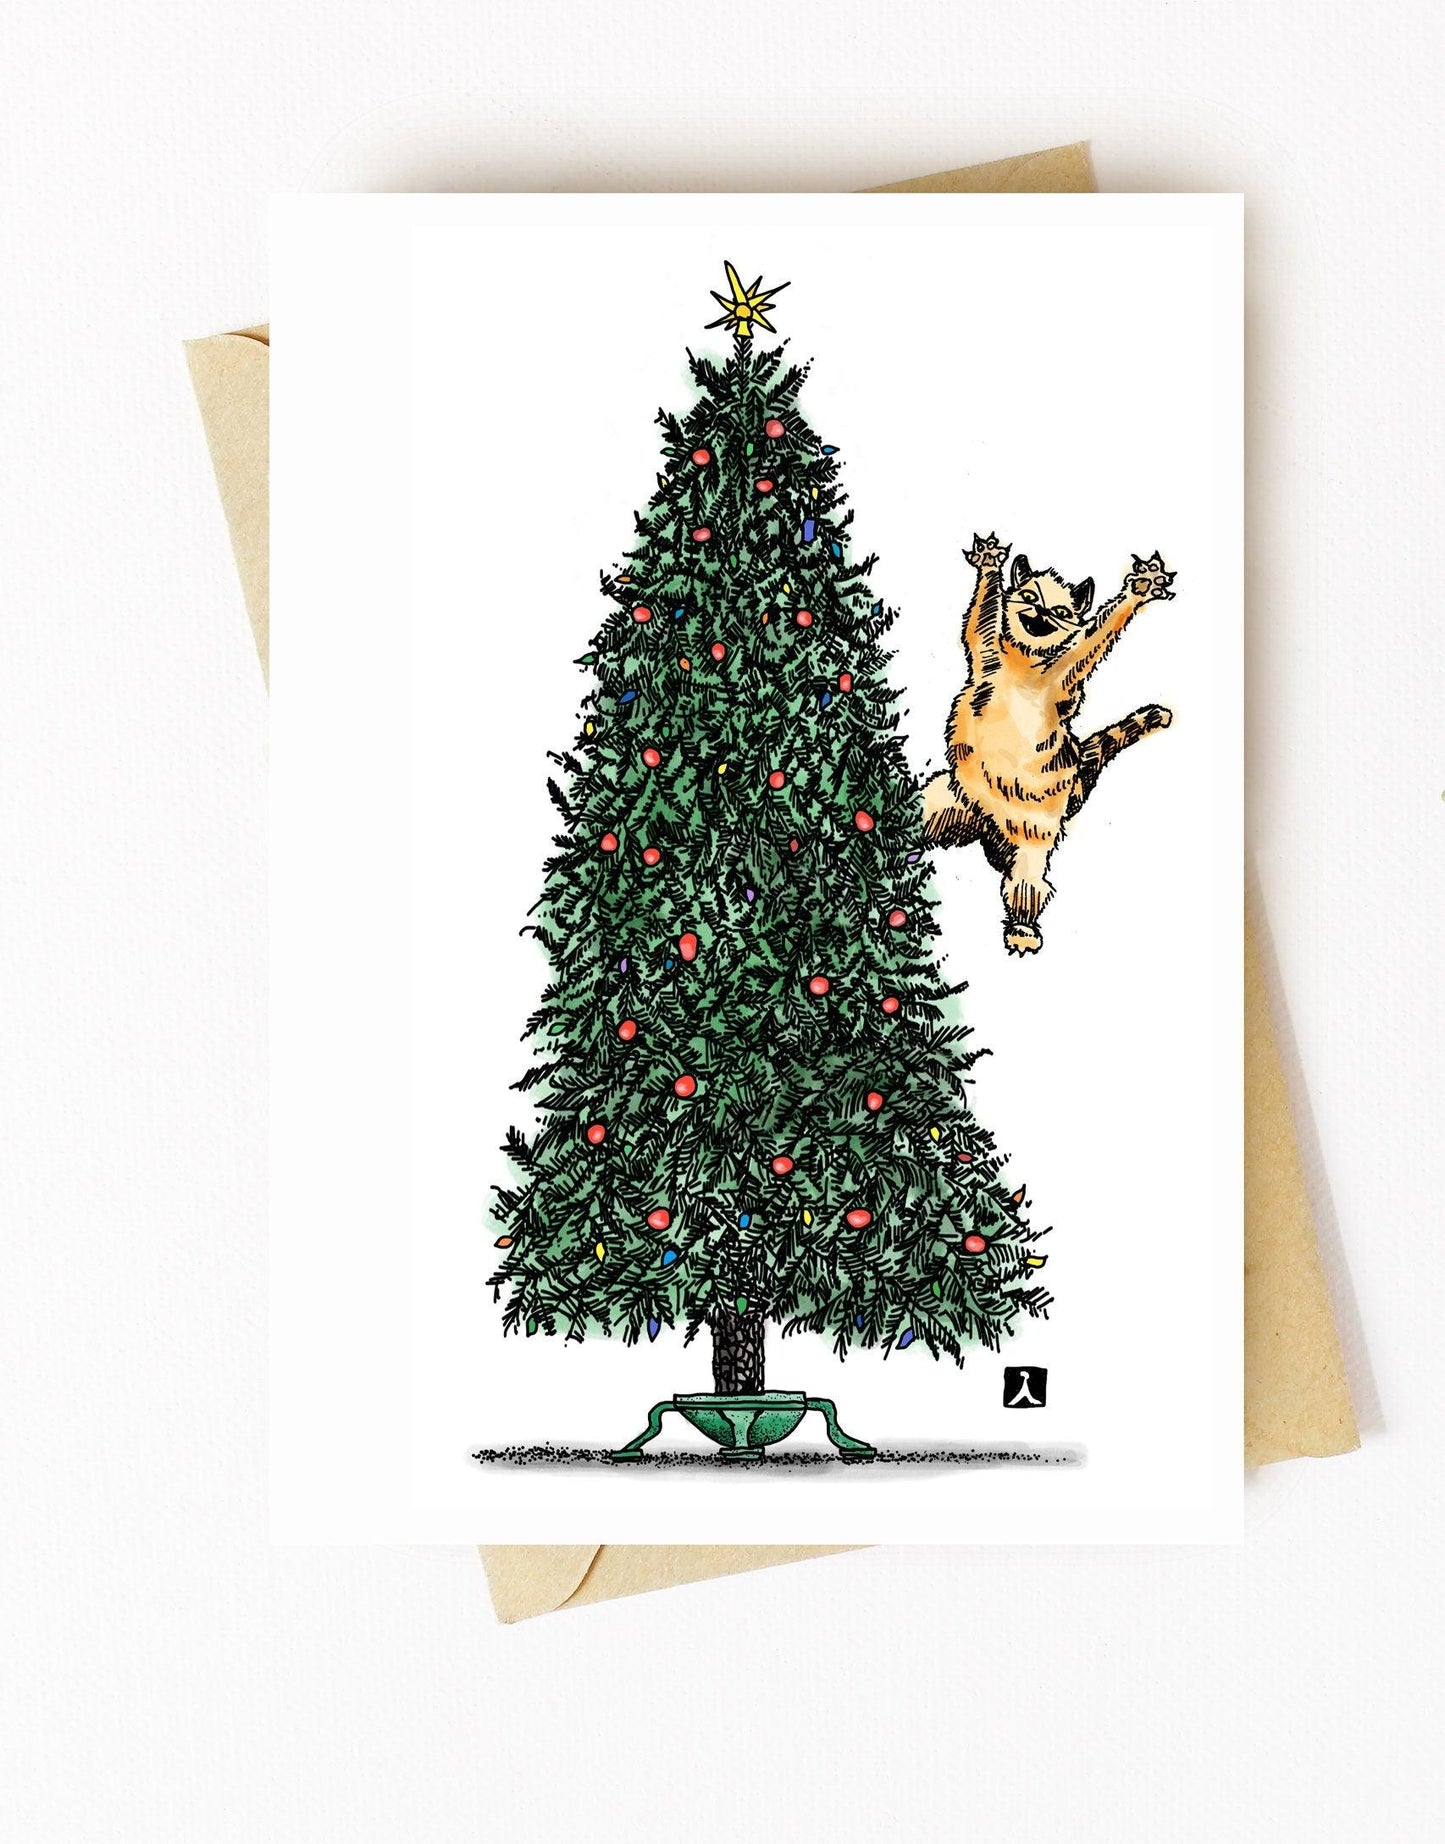 BellavanceInk: Christmas Card With Cat Attacking A Christmas Tree Pen & Ink Watercolor Illustration 5 x 7 Inches - BellavanceInk